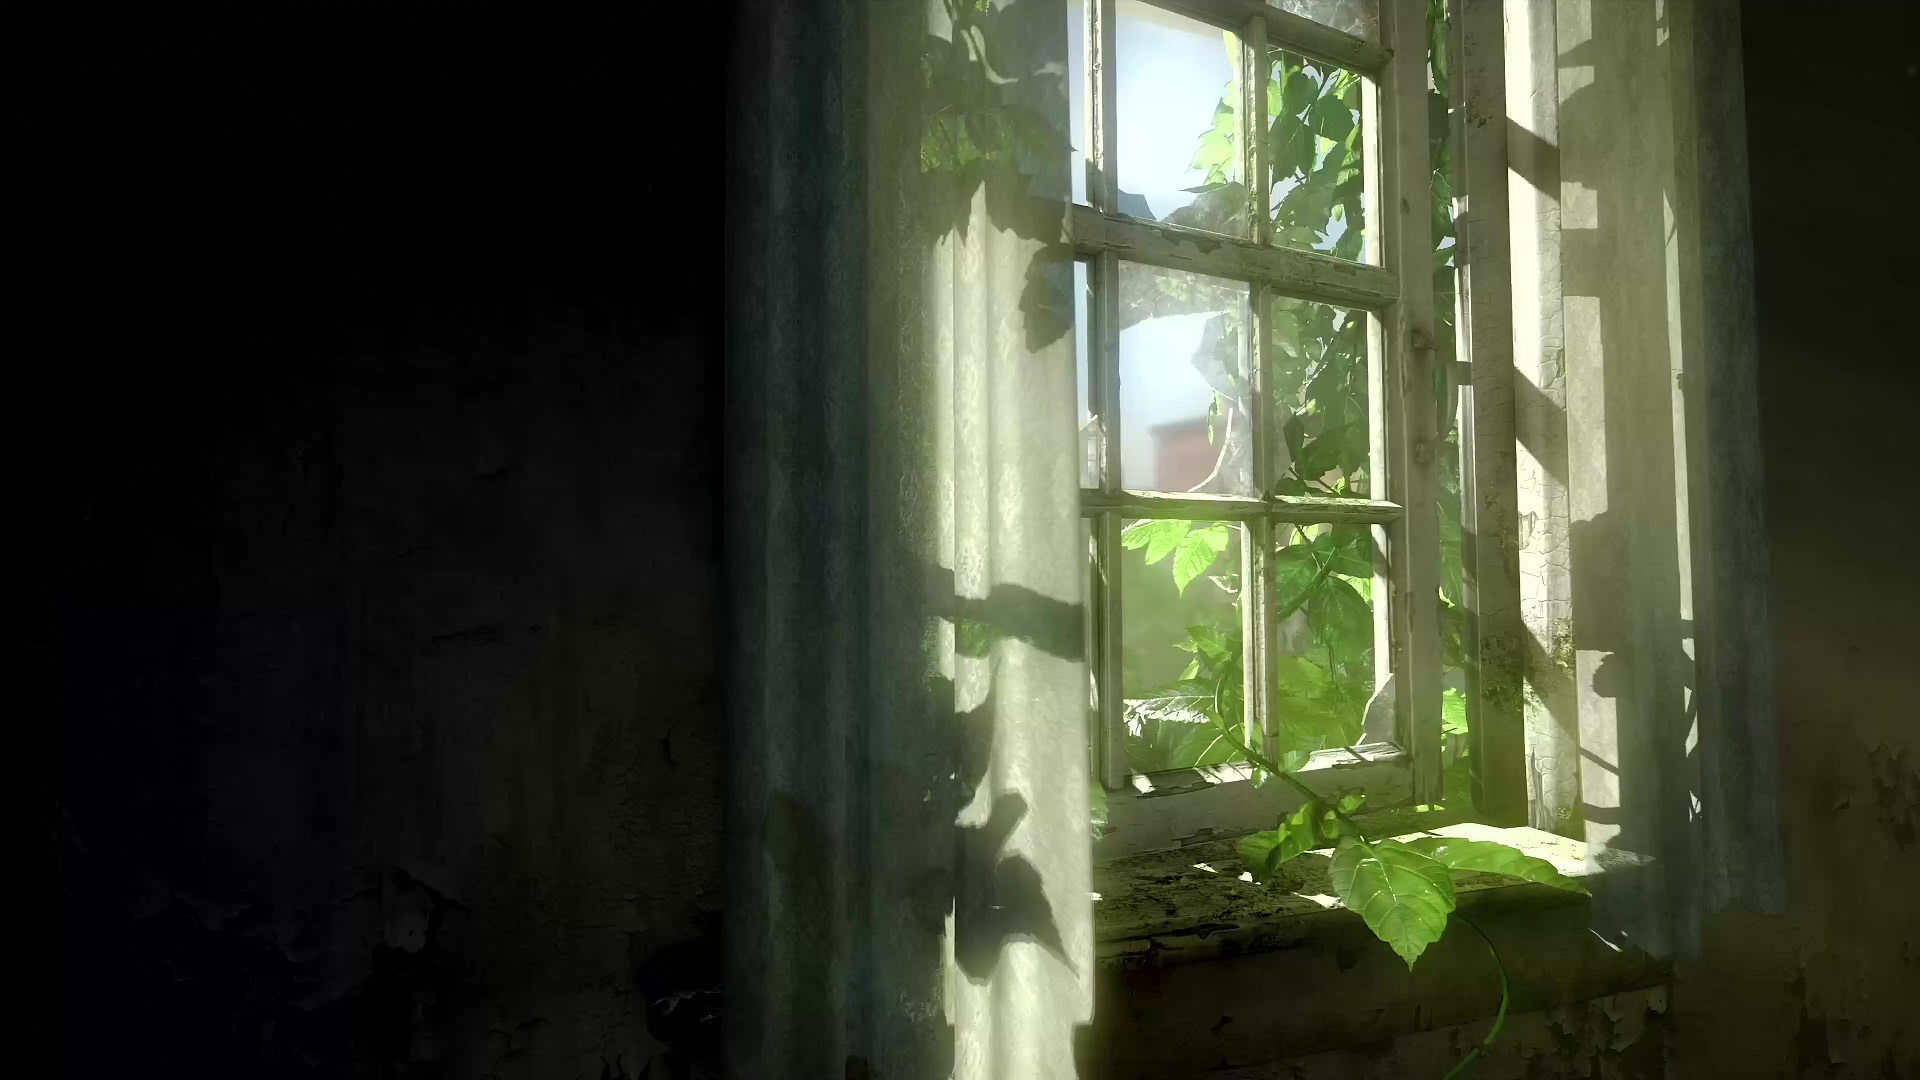 Live wallpaper Home in The Last of Us / interface personalization